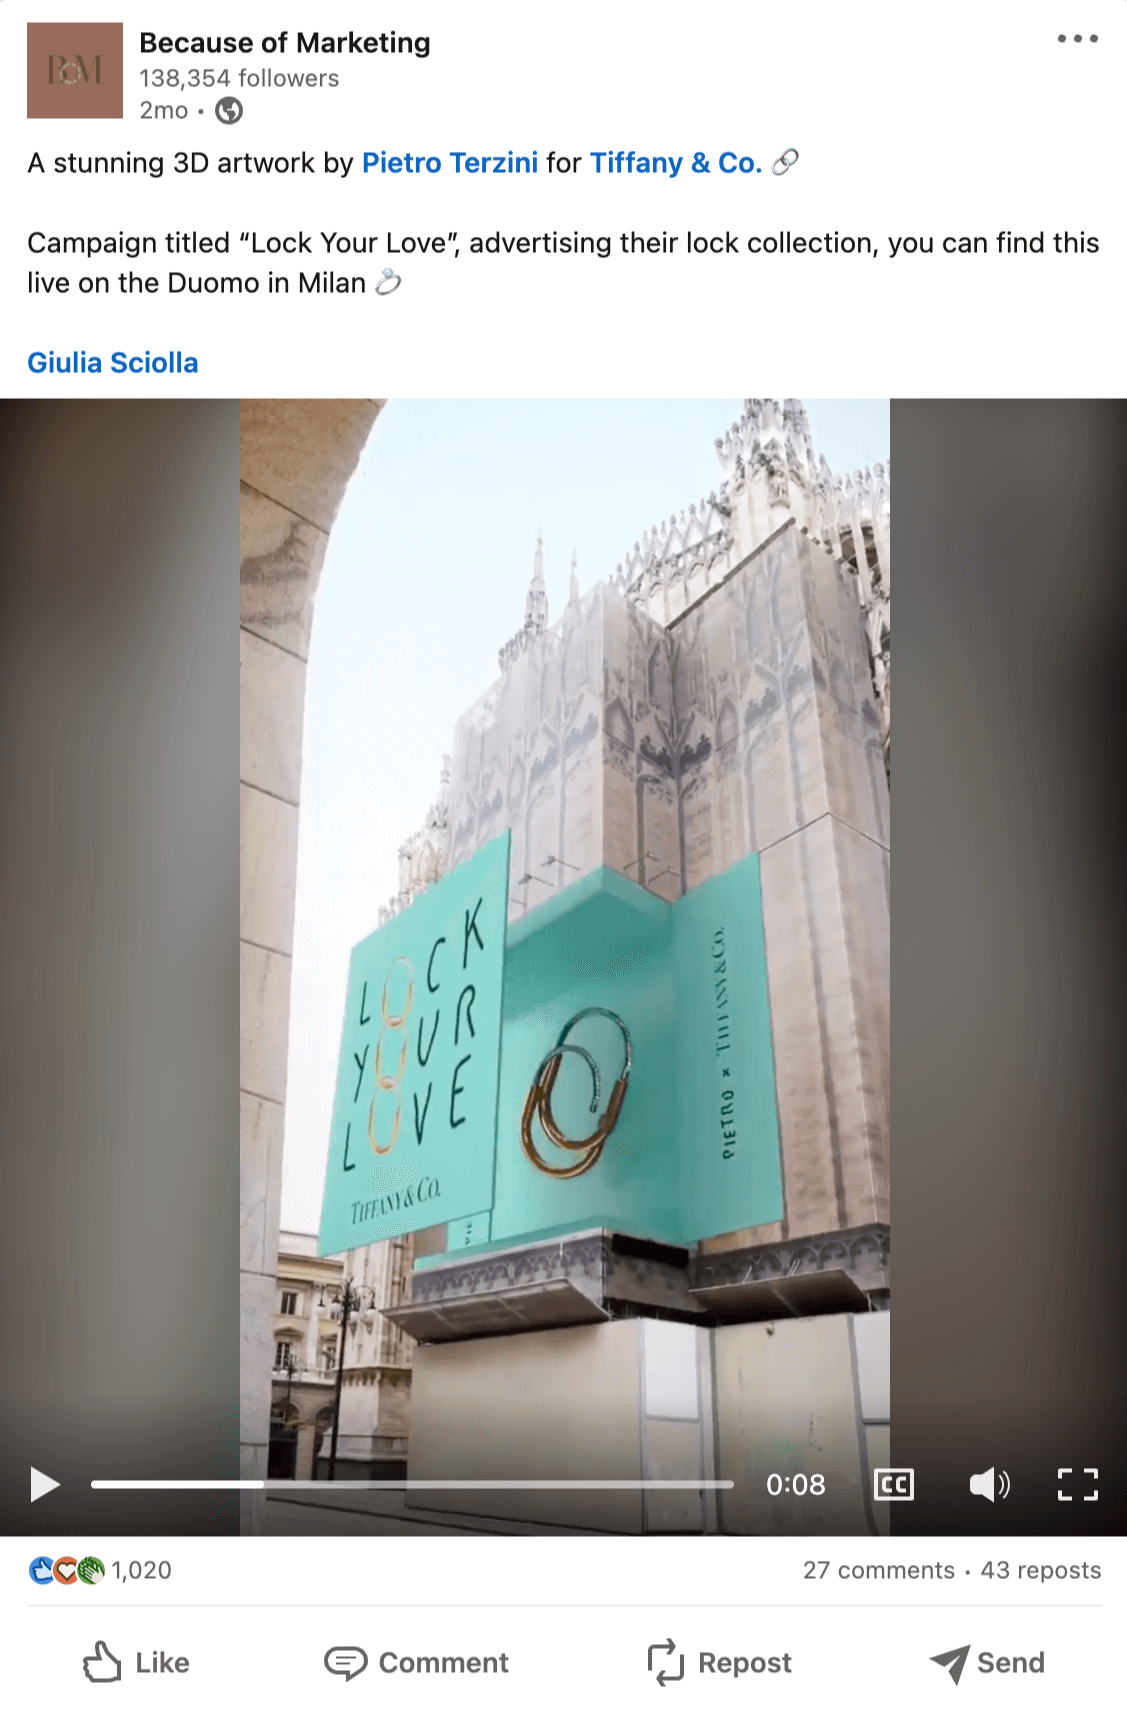 LinkedIn update from Because of Marketing showing a 3D artwork by Pietro Terzini for a Tiffany &Co campaign titled "Lock Your Love".